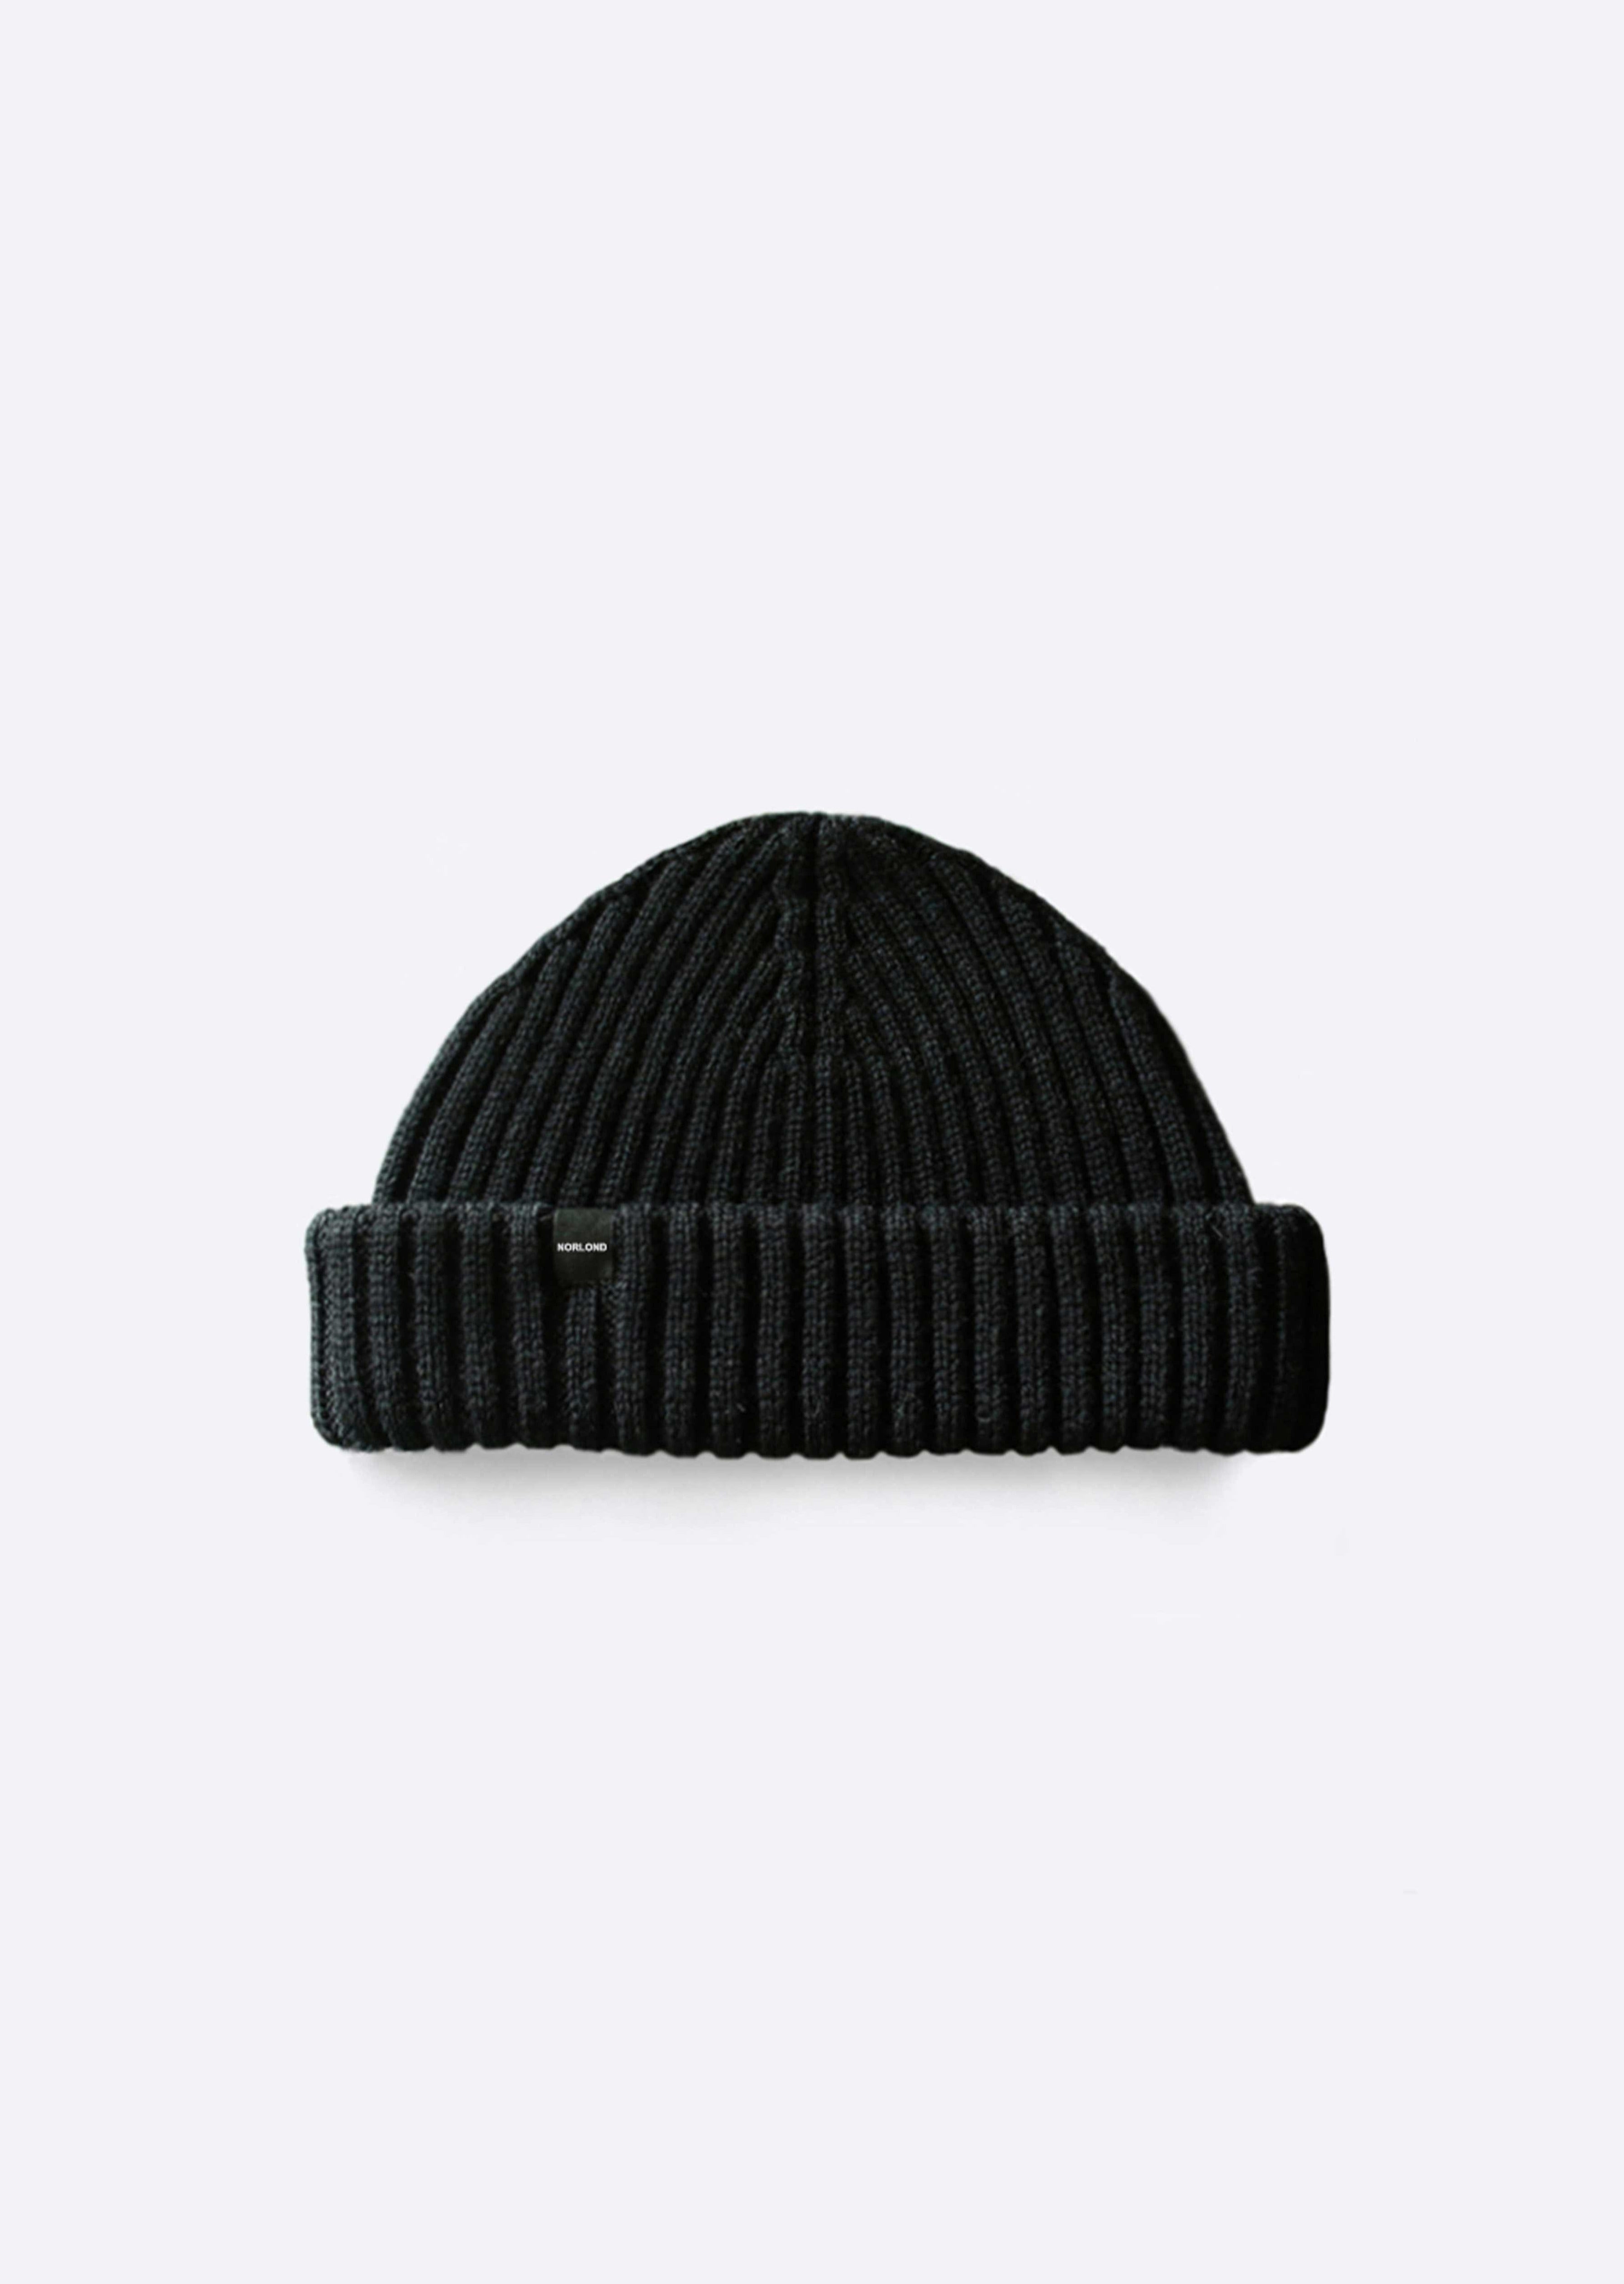 Our Shop - Fisherman Beanies, Watch Caps & More | Norlond